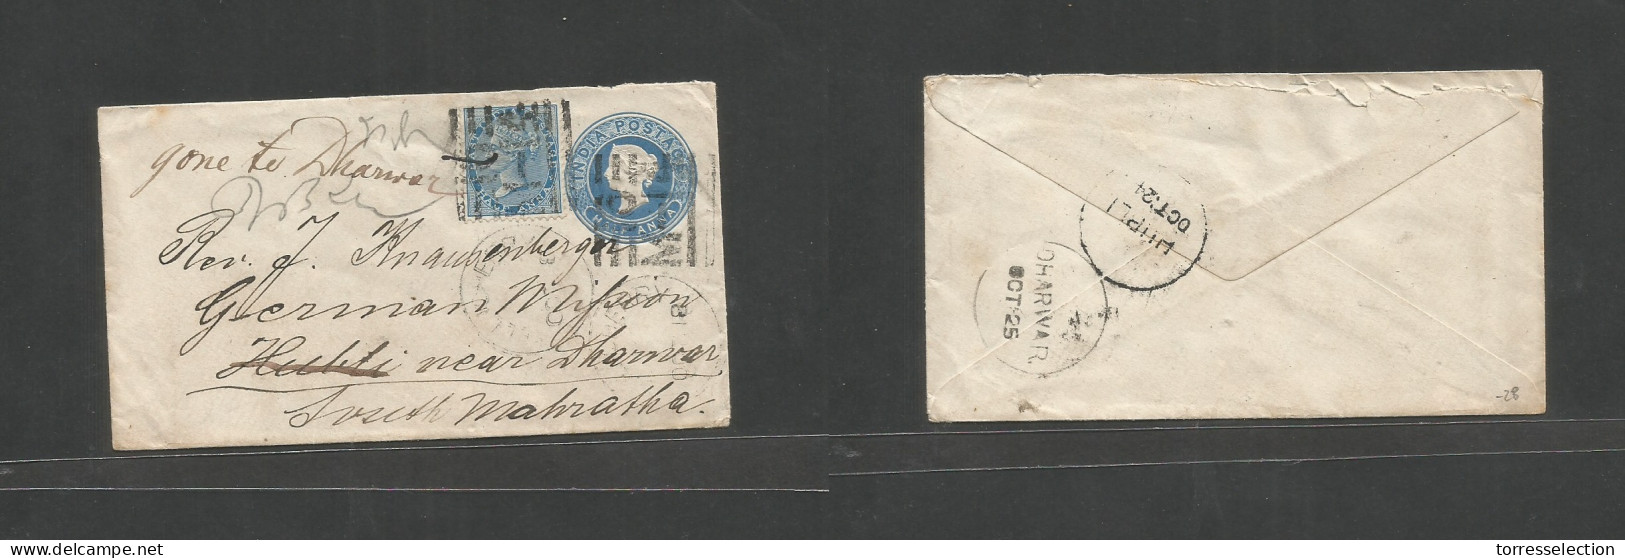 INDIA. C. 1880s. Allchery - Hurly - Dhawar. Fkd Locally Circulated 1/2a Blue + Adtl Stat Env Fwded. Fine. - Autres & Non Classés